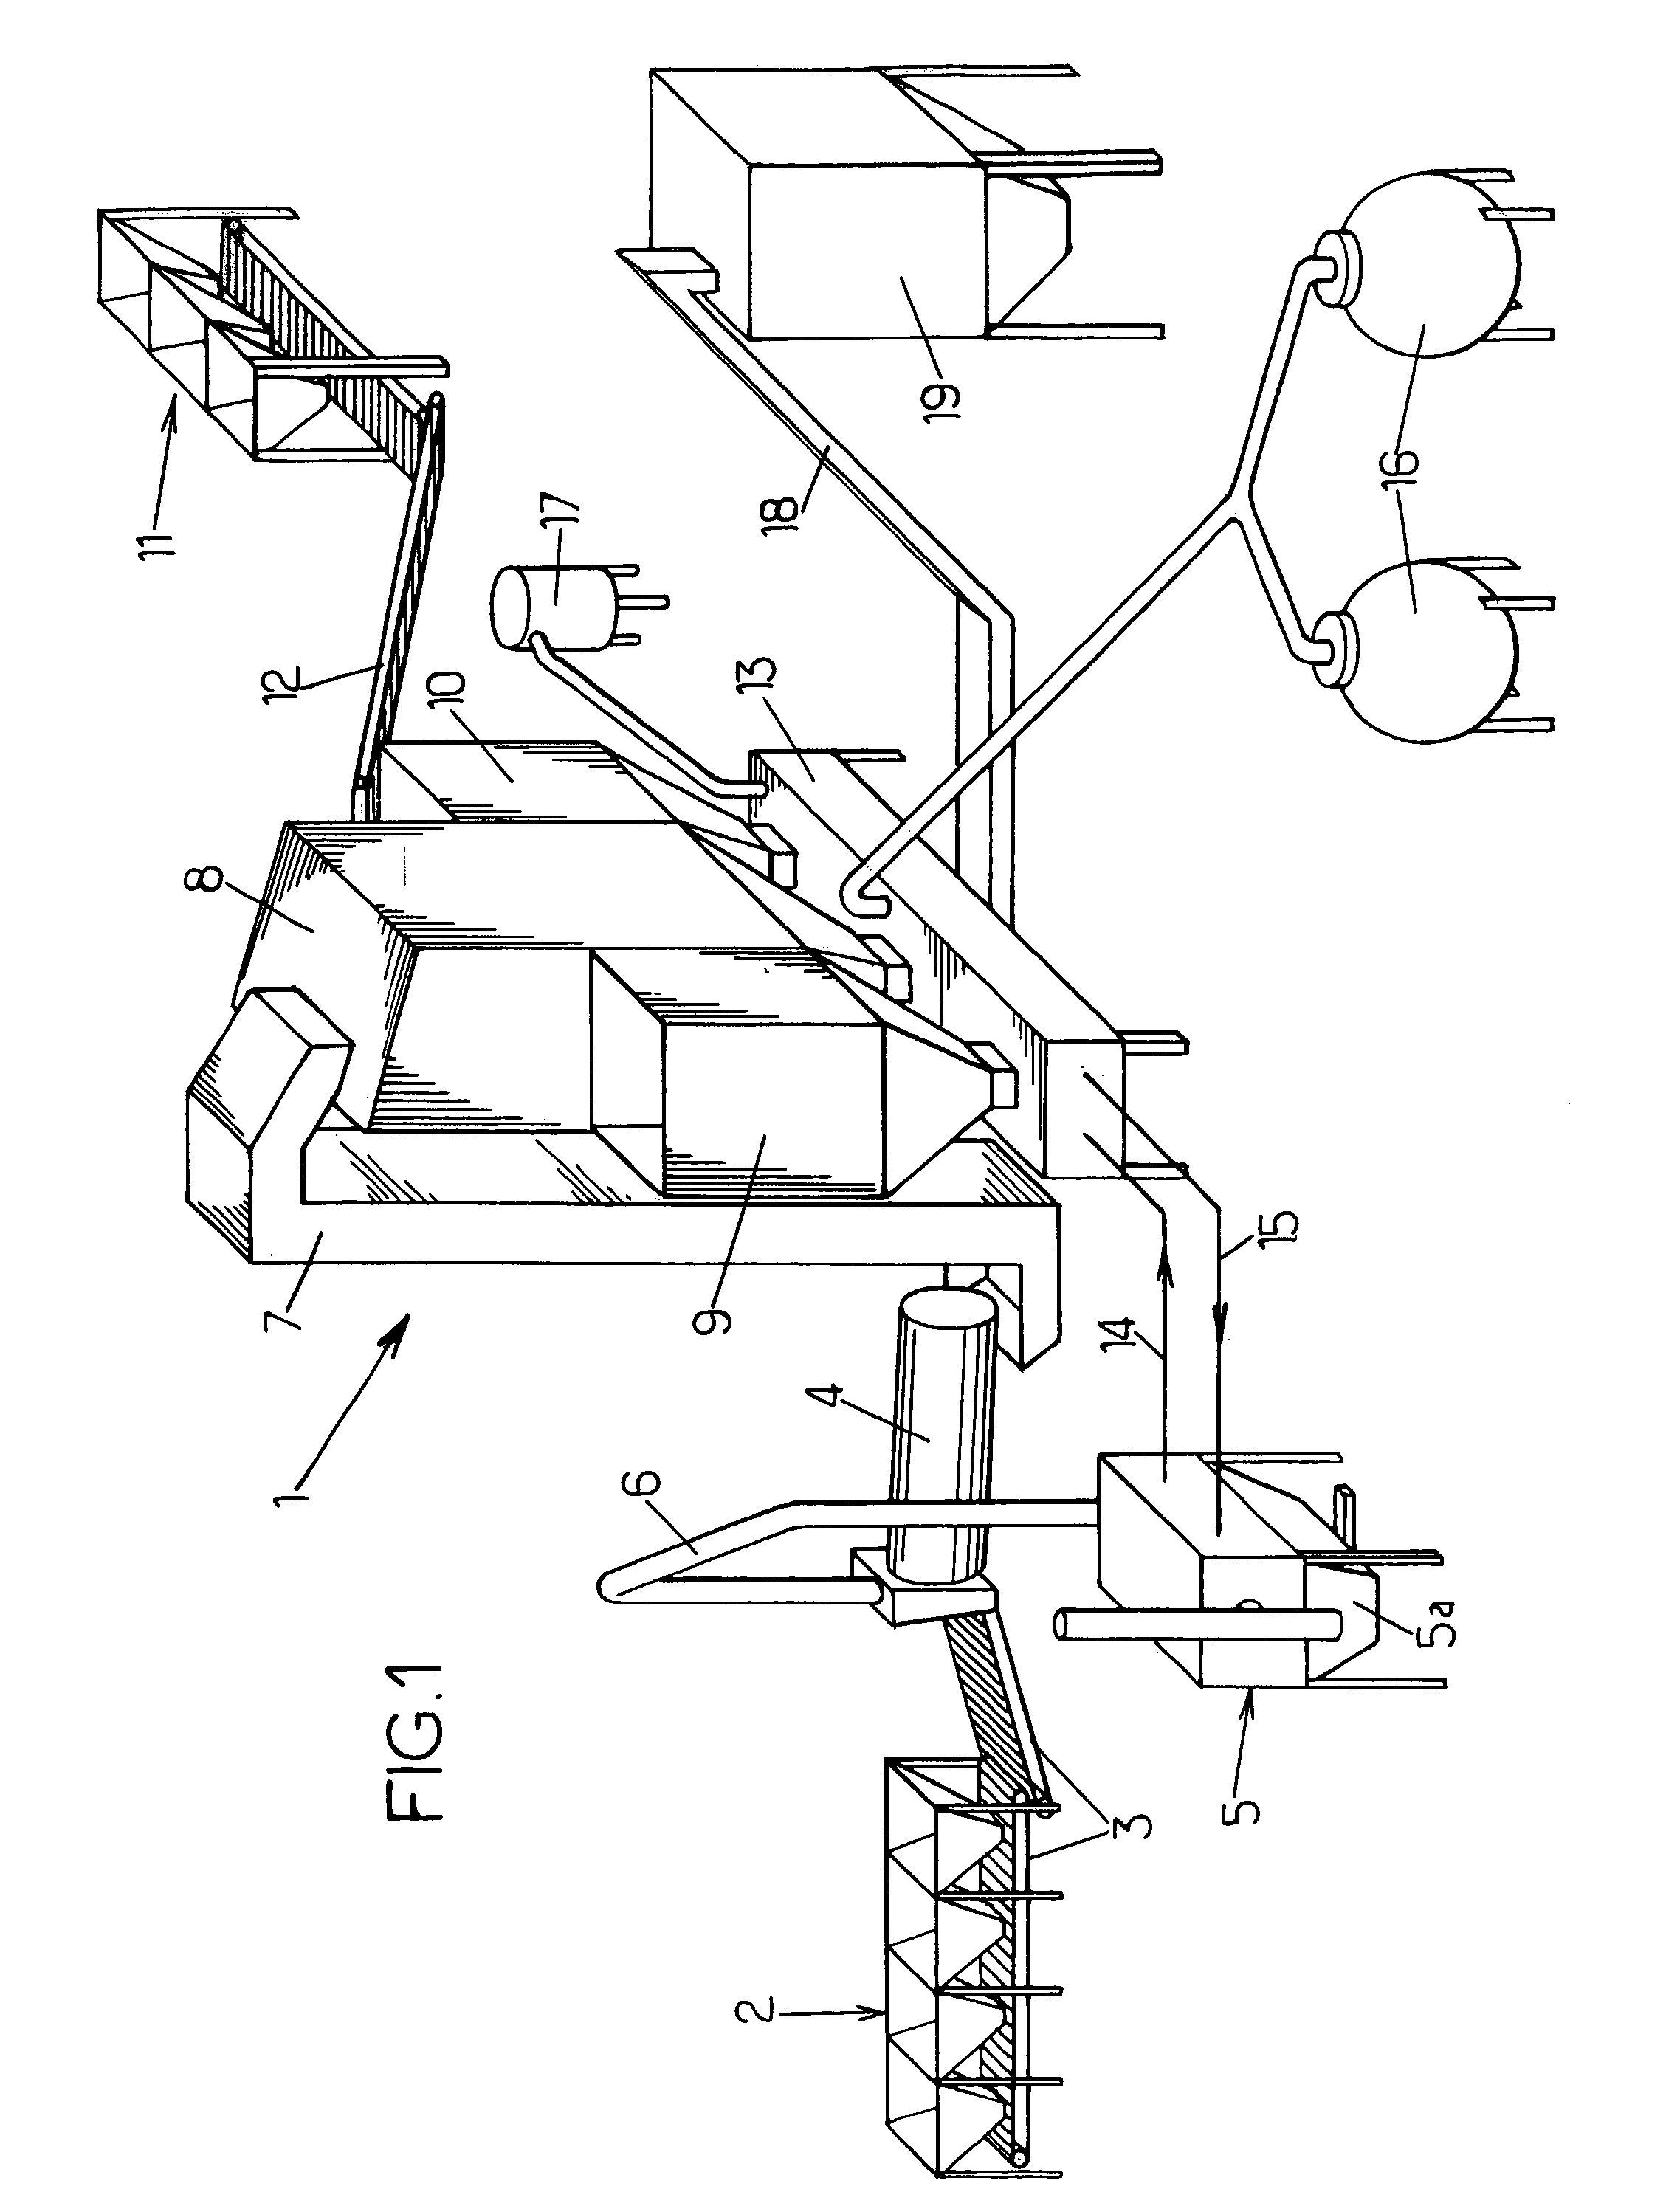 Method of manufacturing a bituminous coated aggregate mix